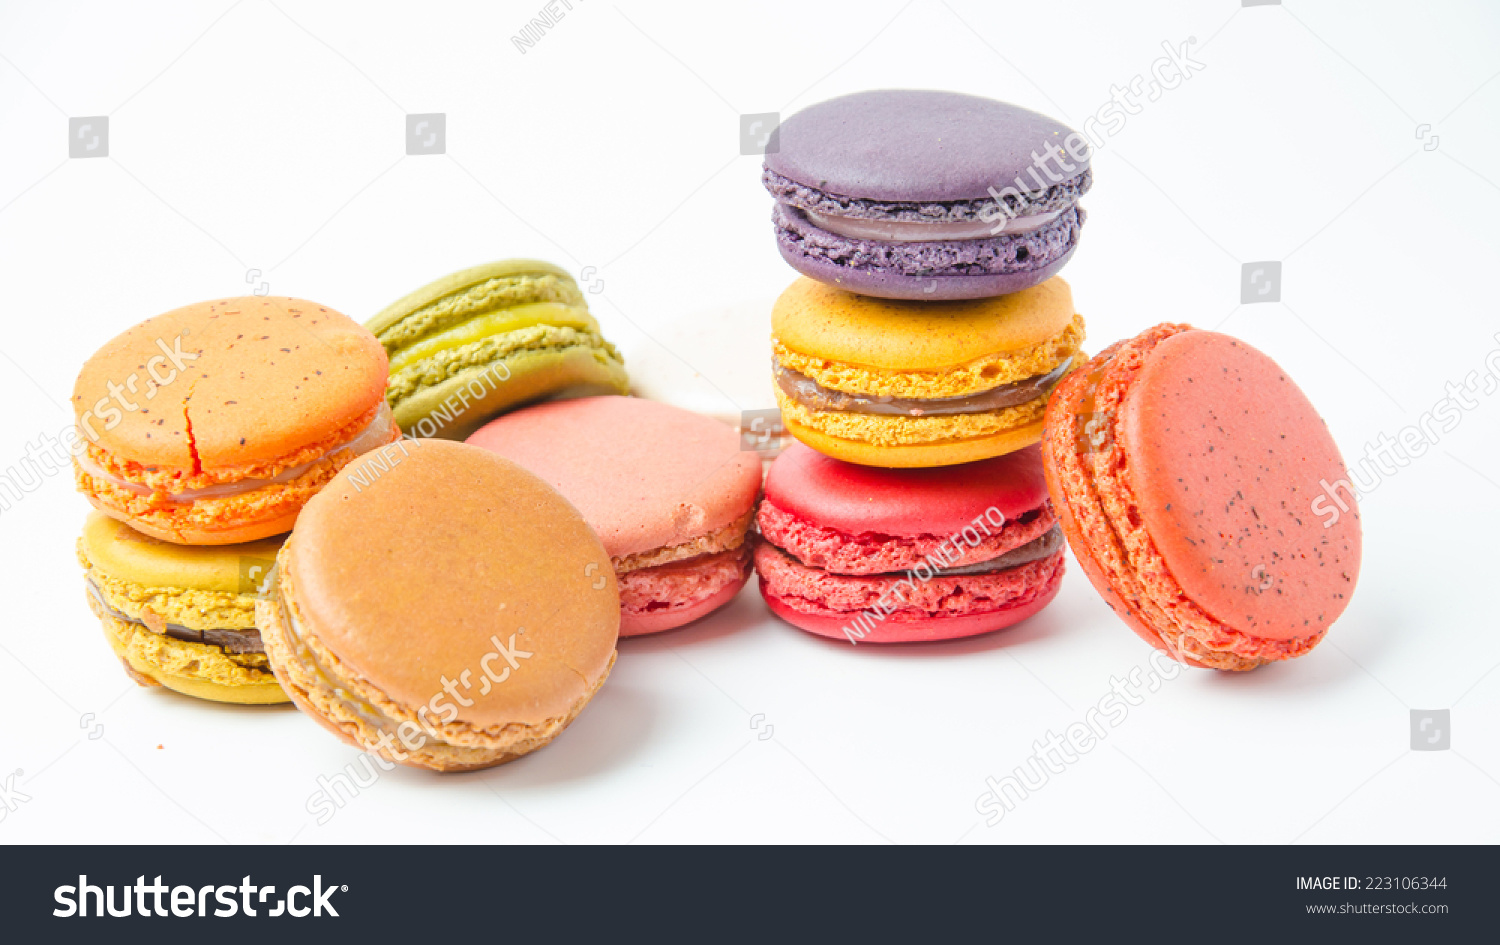 Colorful Macaroons On White Background Stock Photo 223106344 : Shutterstock